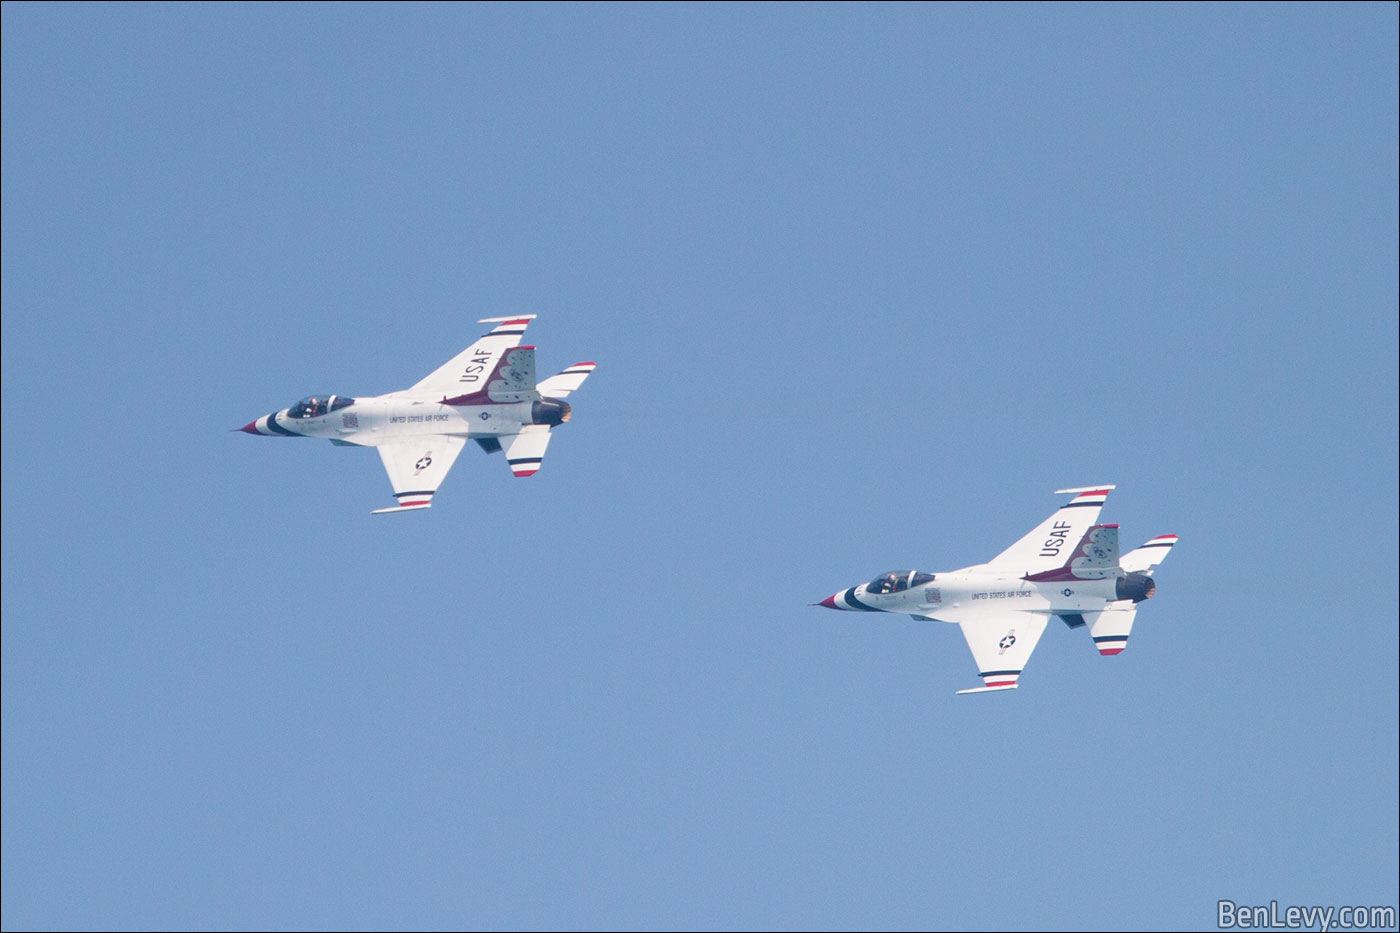 Two Thunderbirds at the air show